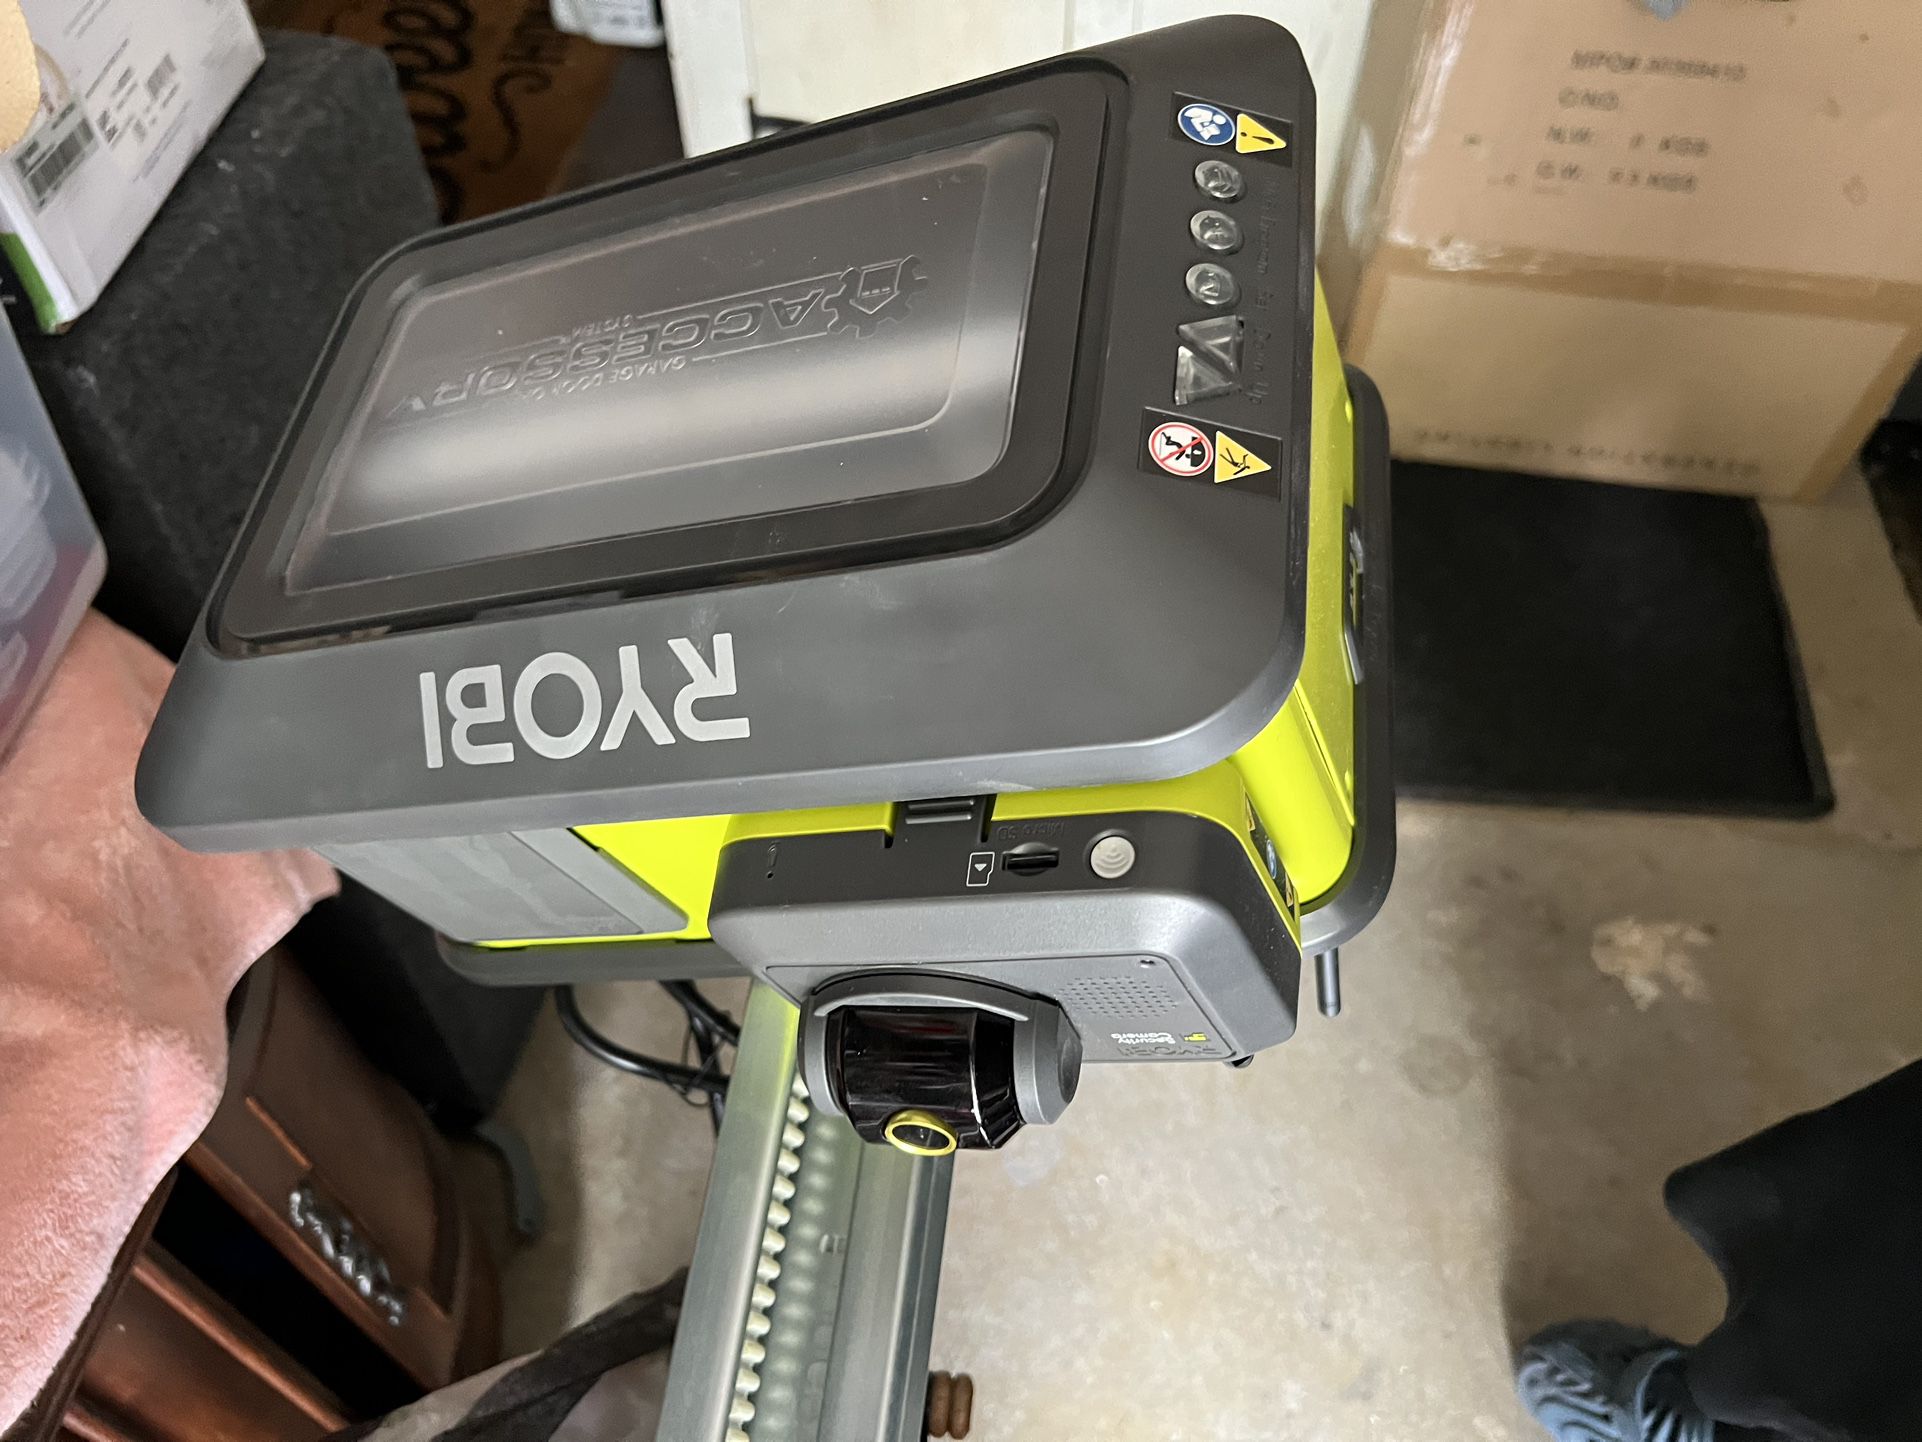 Ryobi Garage Door Opener With Track  And Security Camera Attachment 